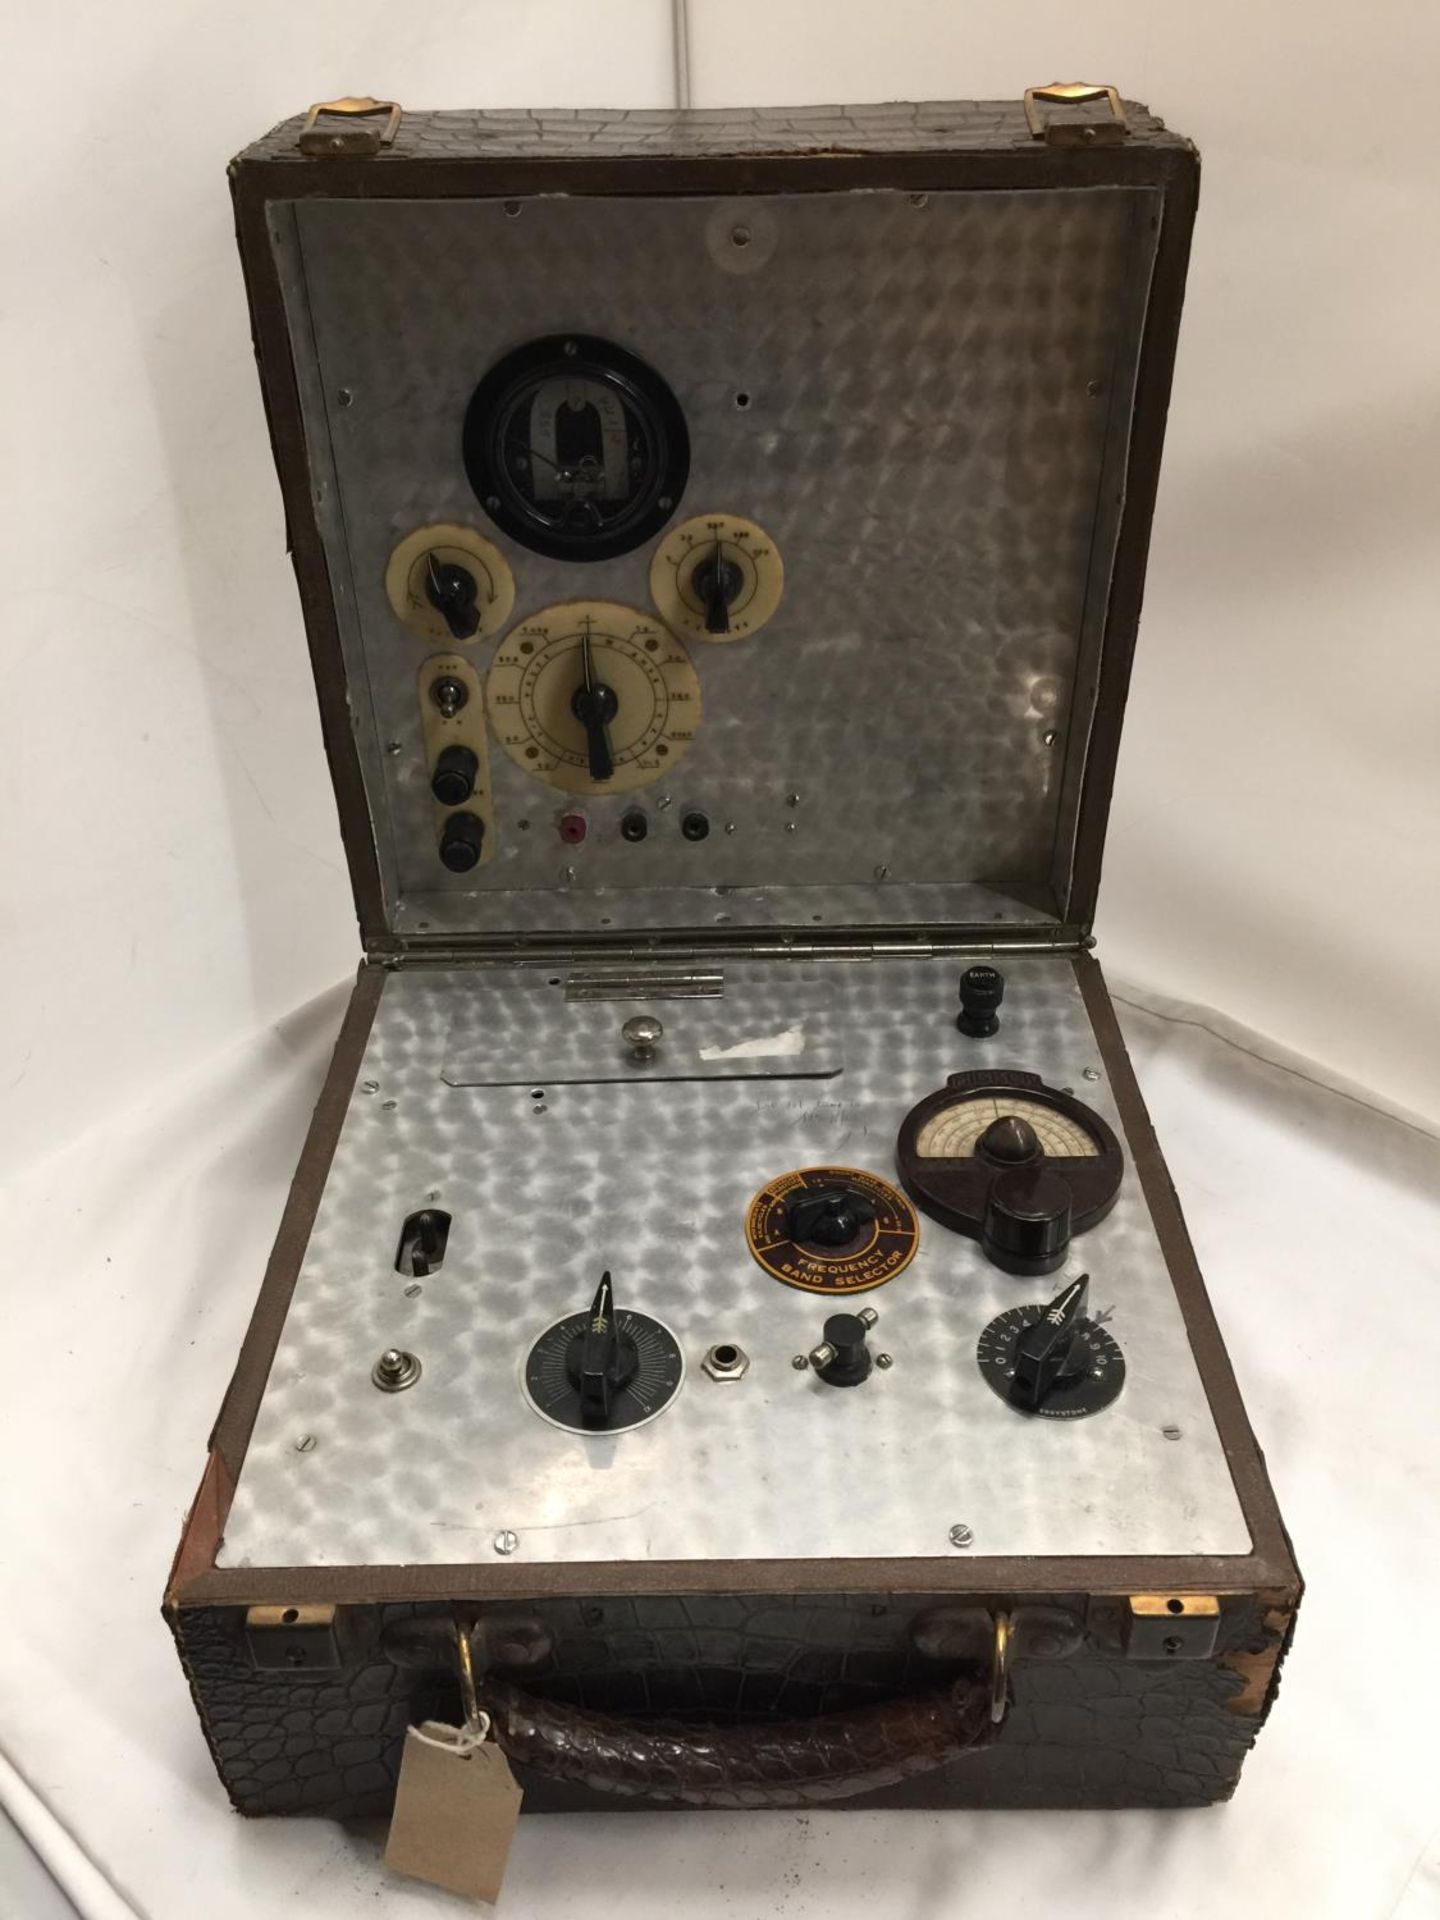 A MID 20TH CENTURY BRITISH TRANSCEIVER SUITCASE RADIO, SIMILAR TO ONES USED BY THE S.O.E FIELD